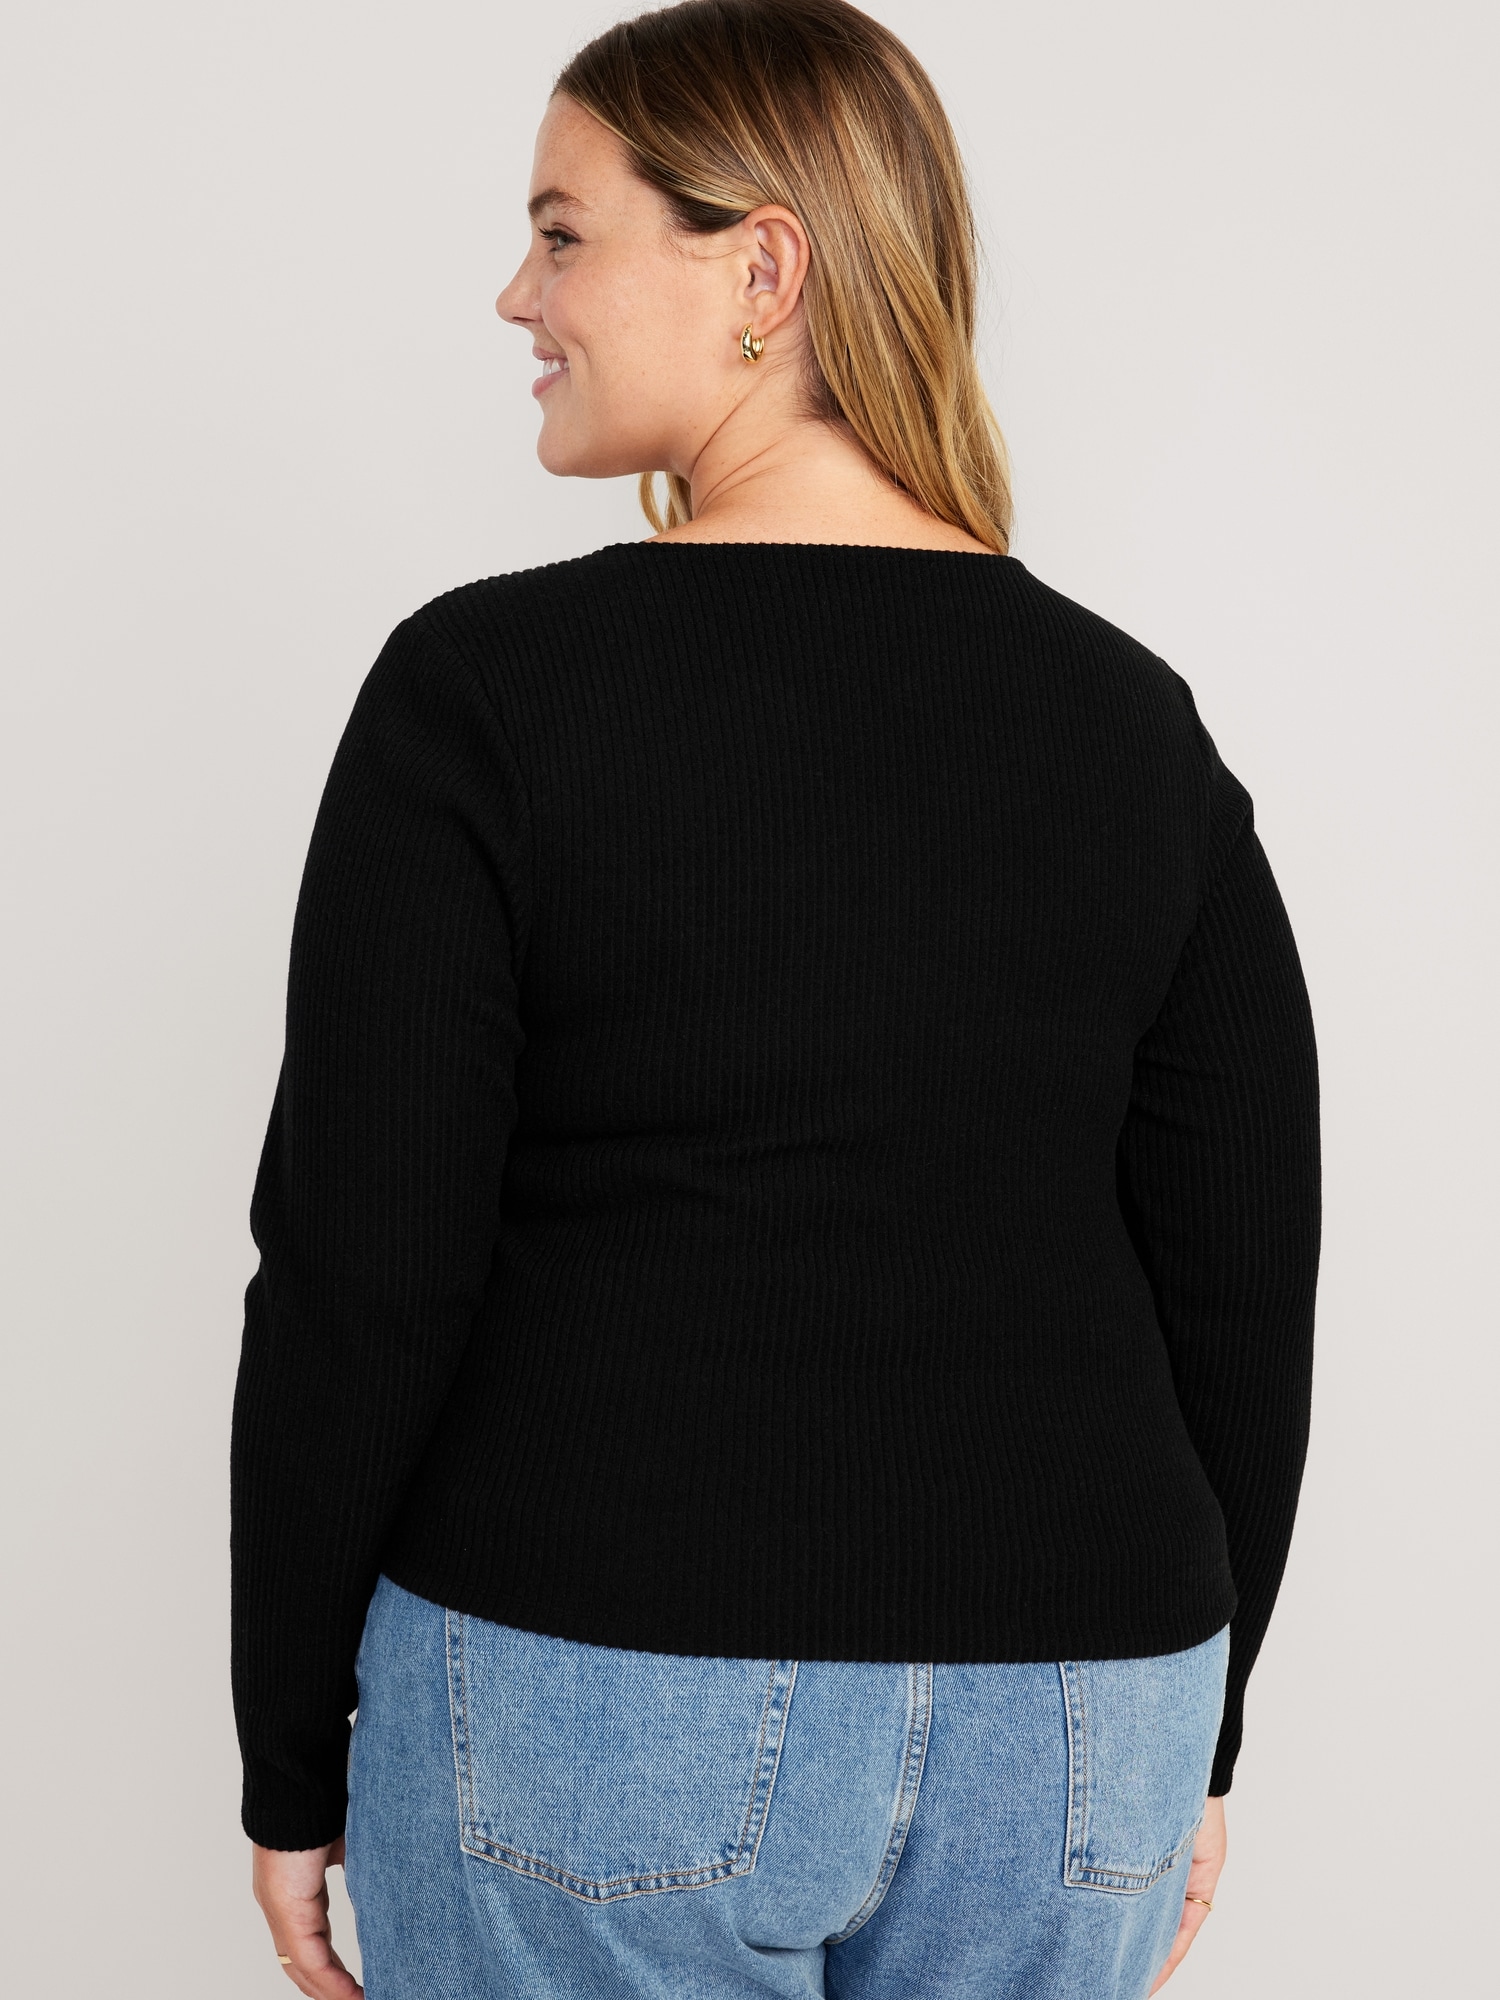 Fitted Long-Sleeve Strappy Keyhole Top for Women | Old Navy